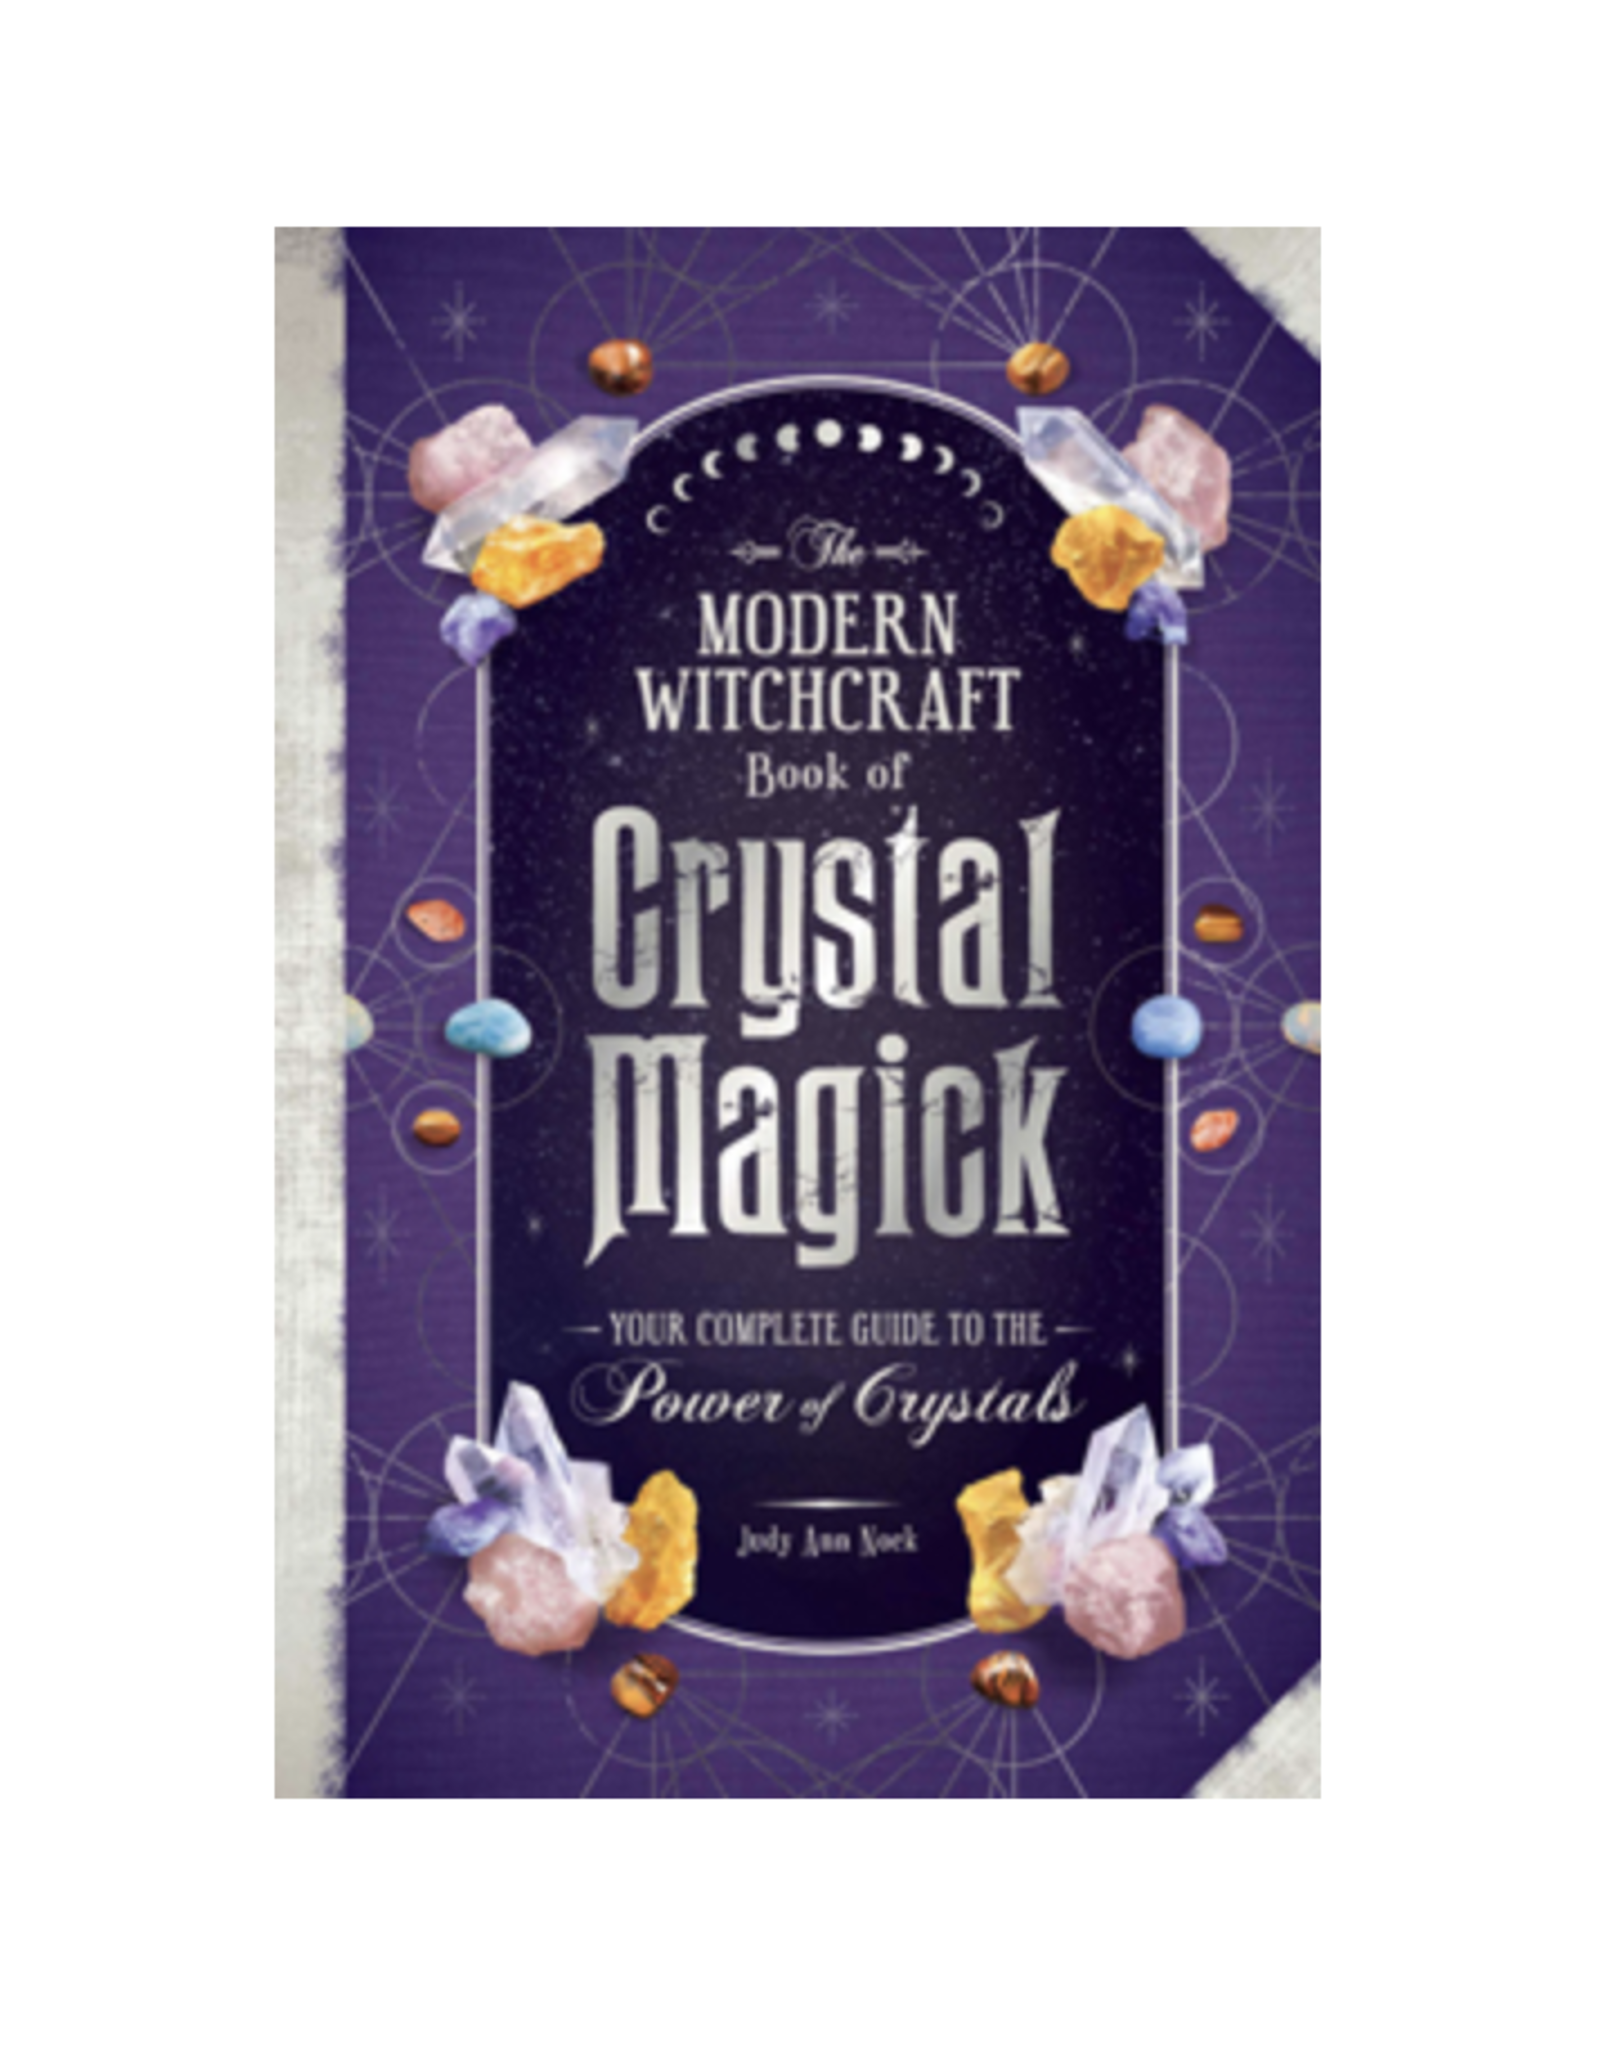 Modern Witchcraft Book of Crystal Magick - Your Complete Guide to the Power of Crystals